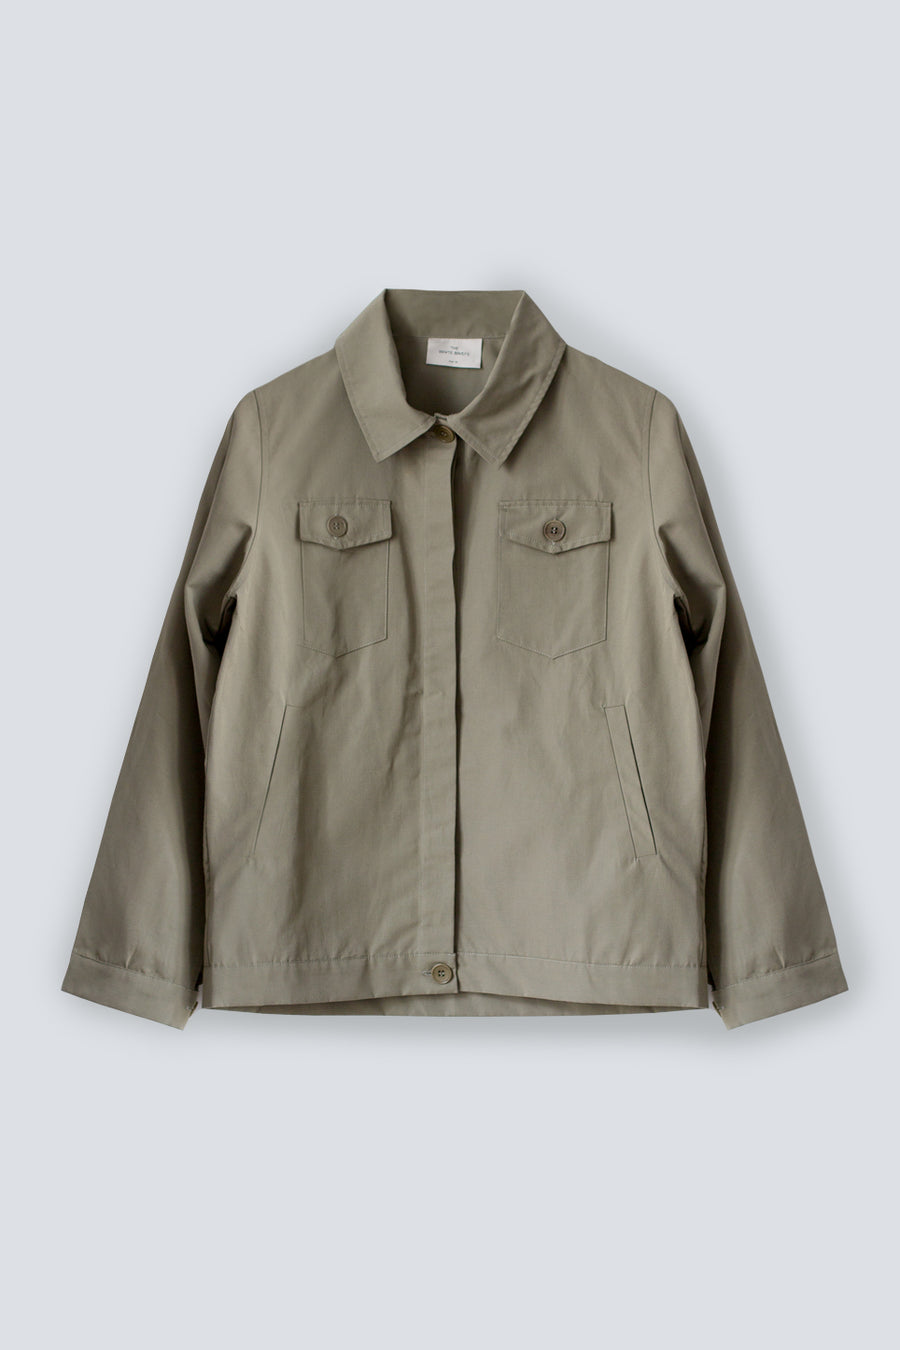 Utility style women's jacket in khaki made from organic linen cotton blend by The White Briefs